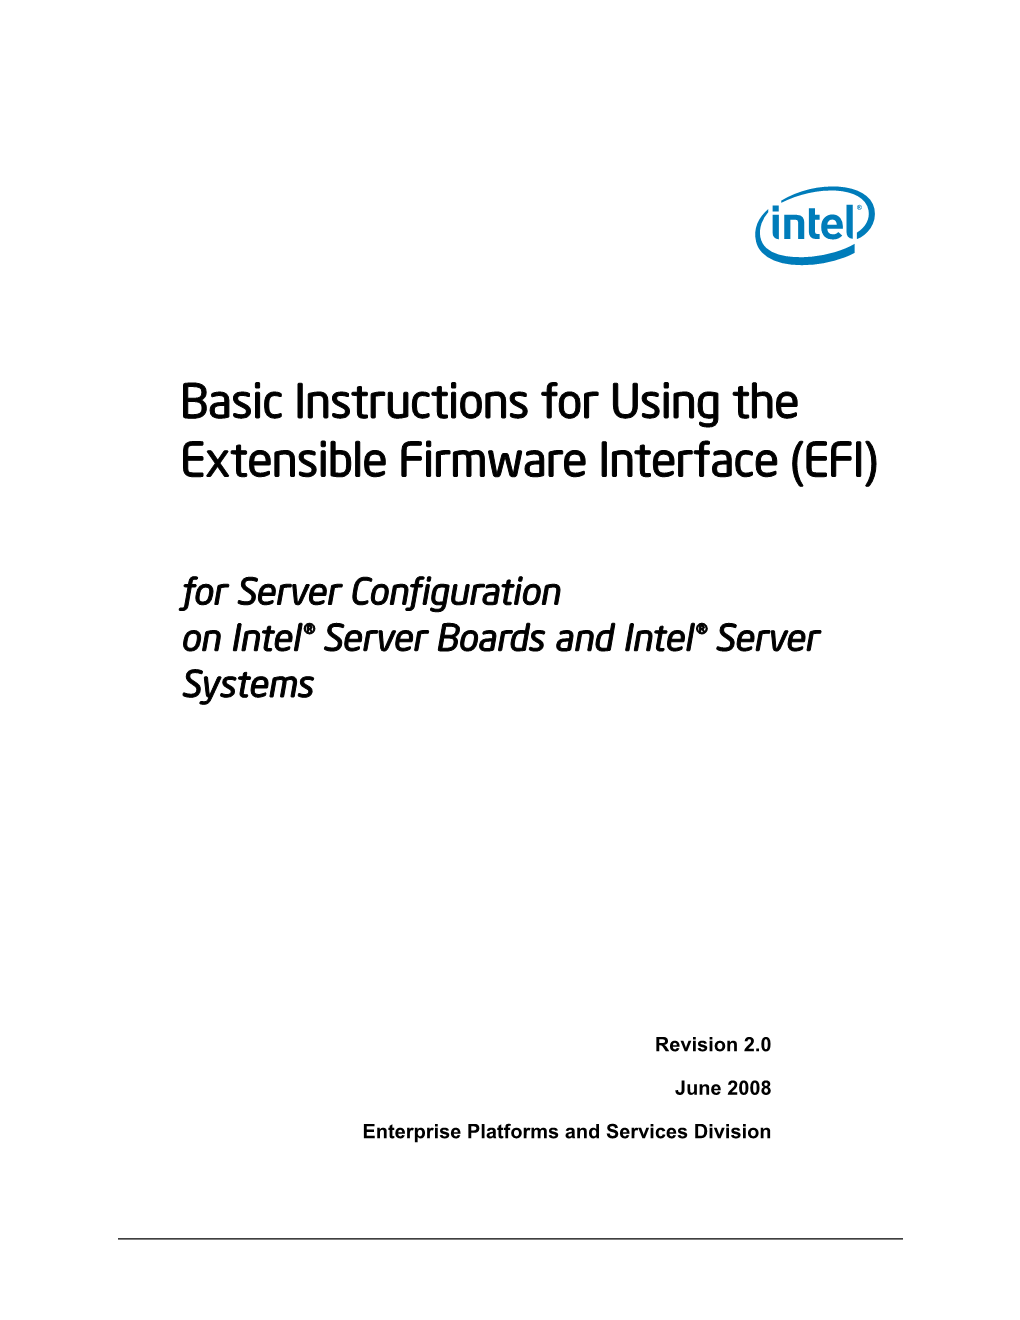 Basic Instructions for Using the Extensible Firmware Interface (EFI) for Server Configuration on Intel® Server Boards and Intel® Server Systems